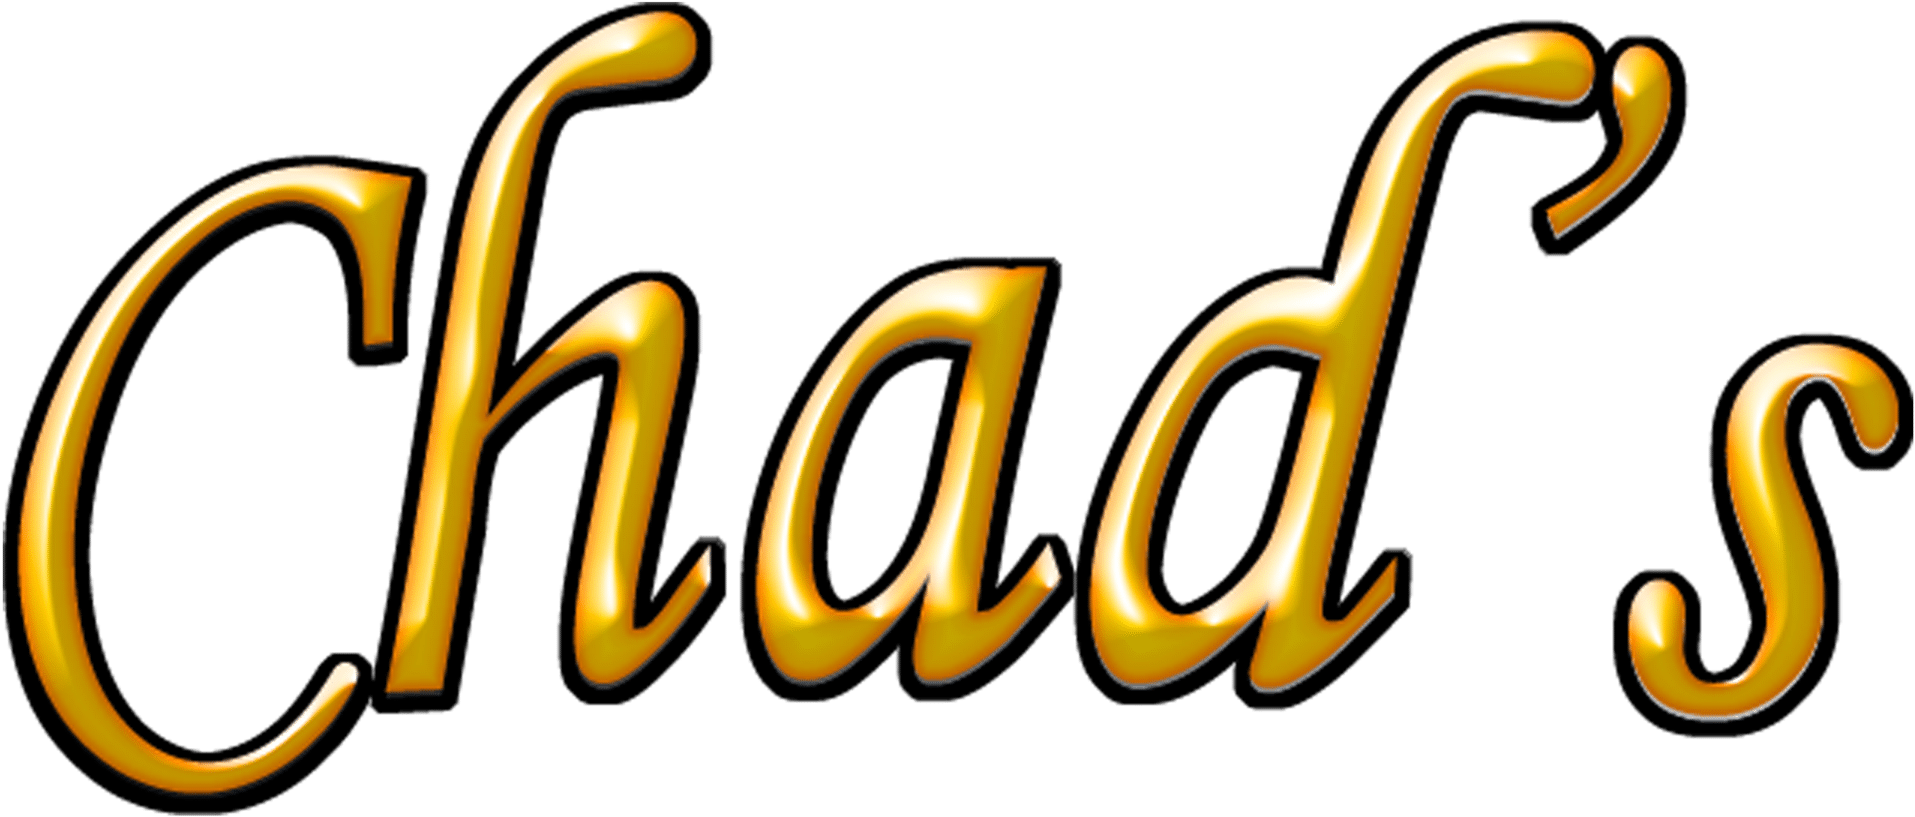 A Gold Text With Black Background